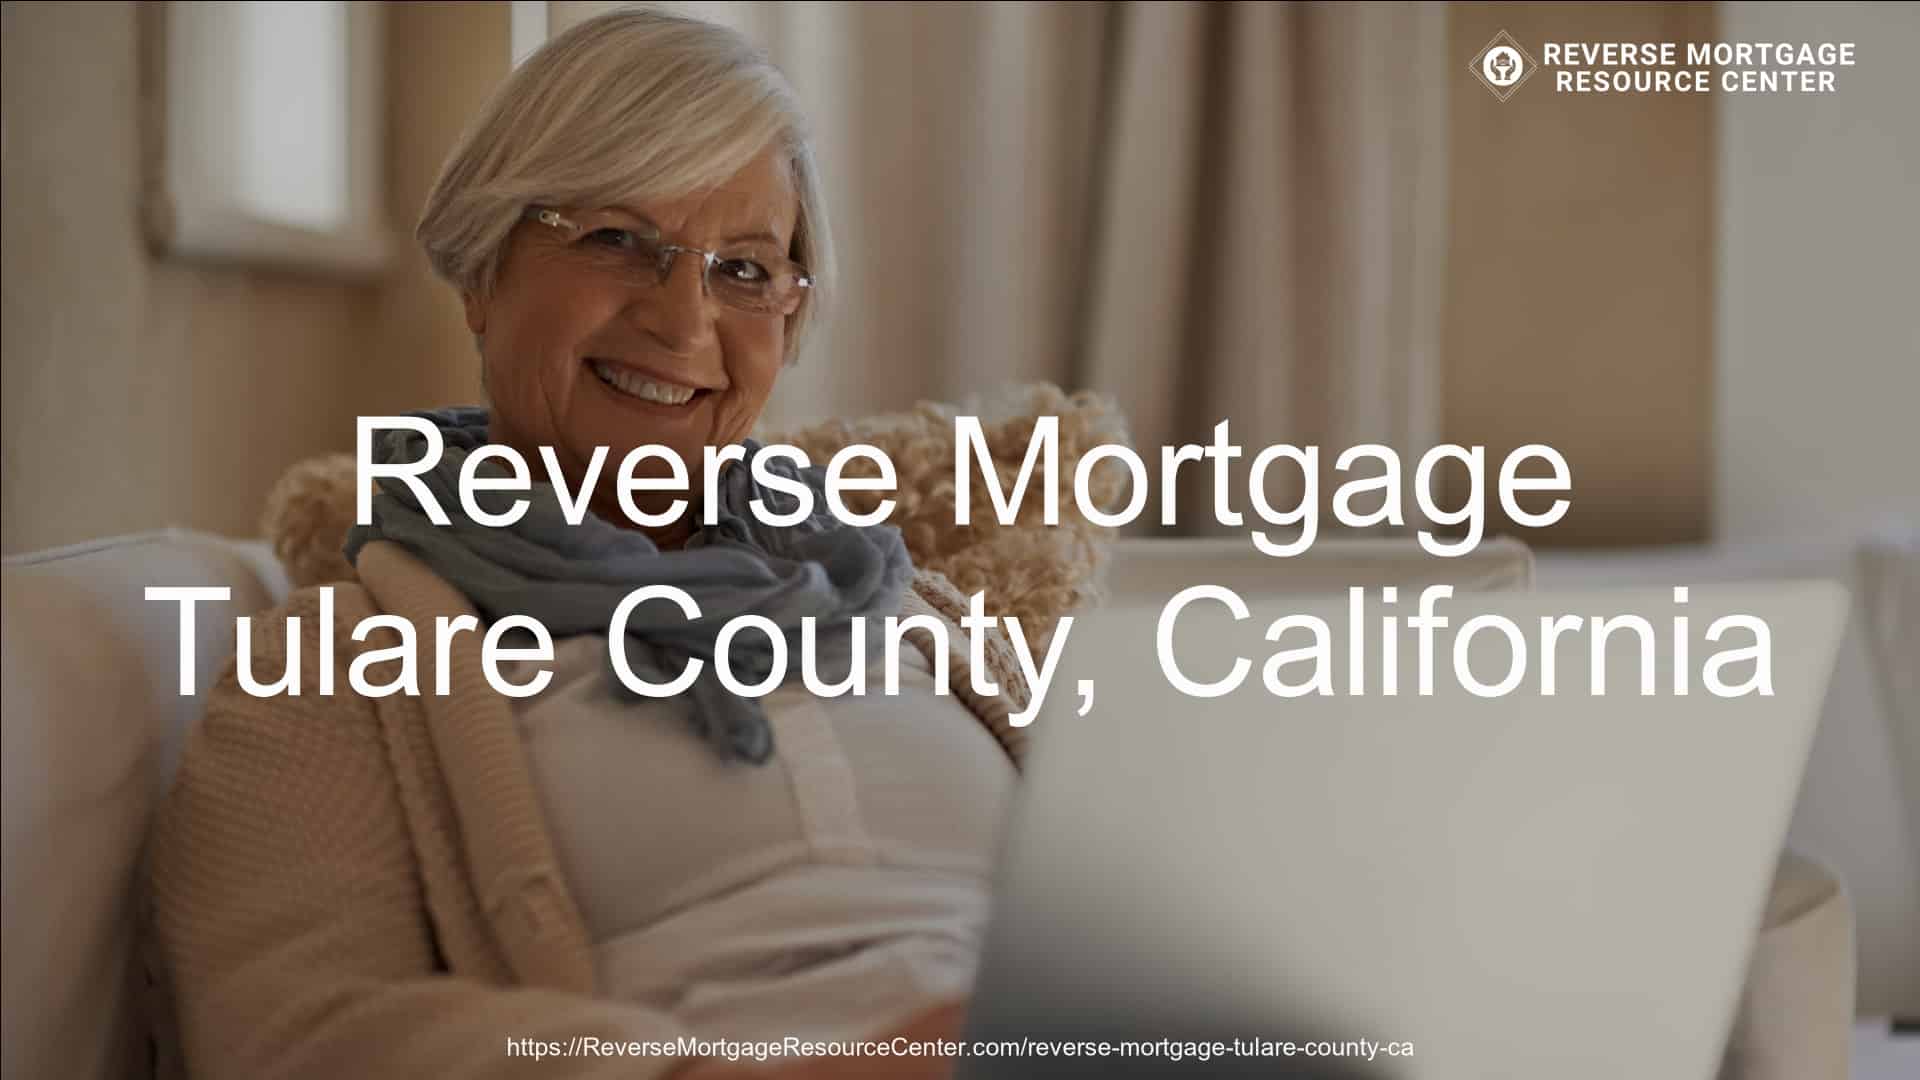 Reverse Mortgage Loans in Tulare County California